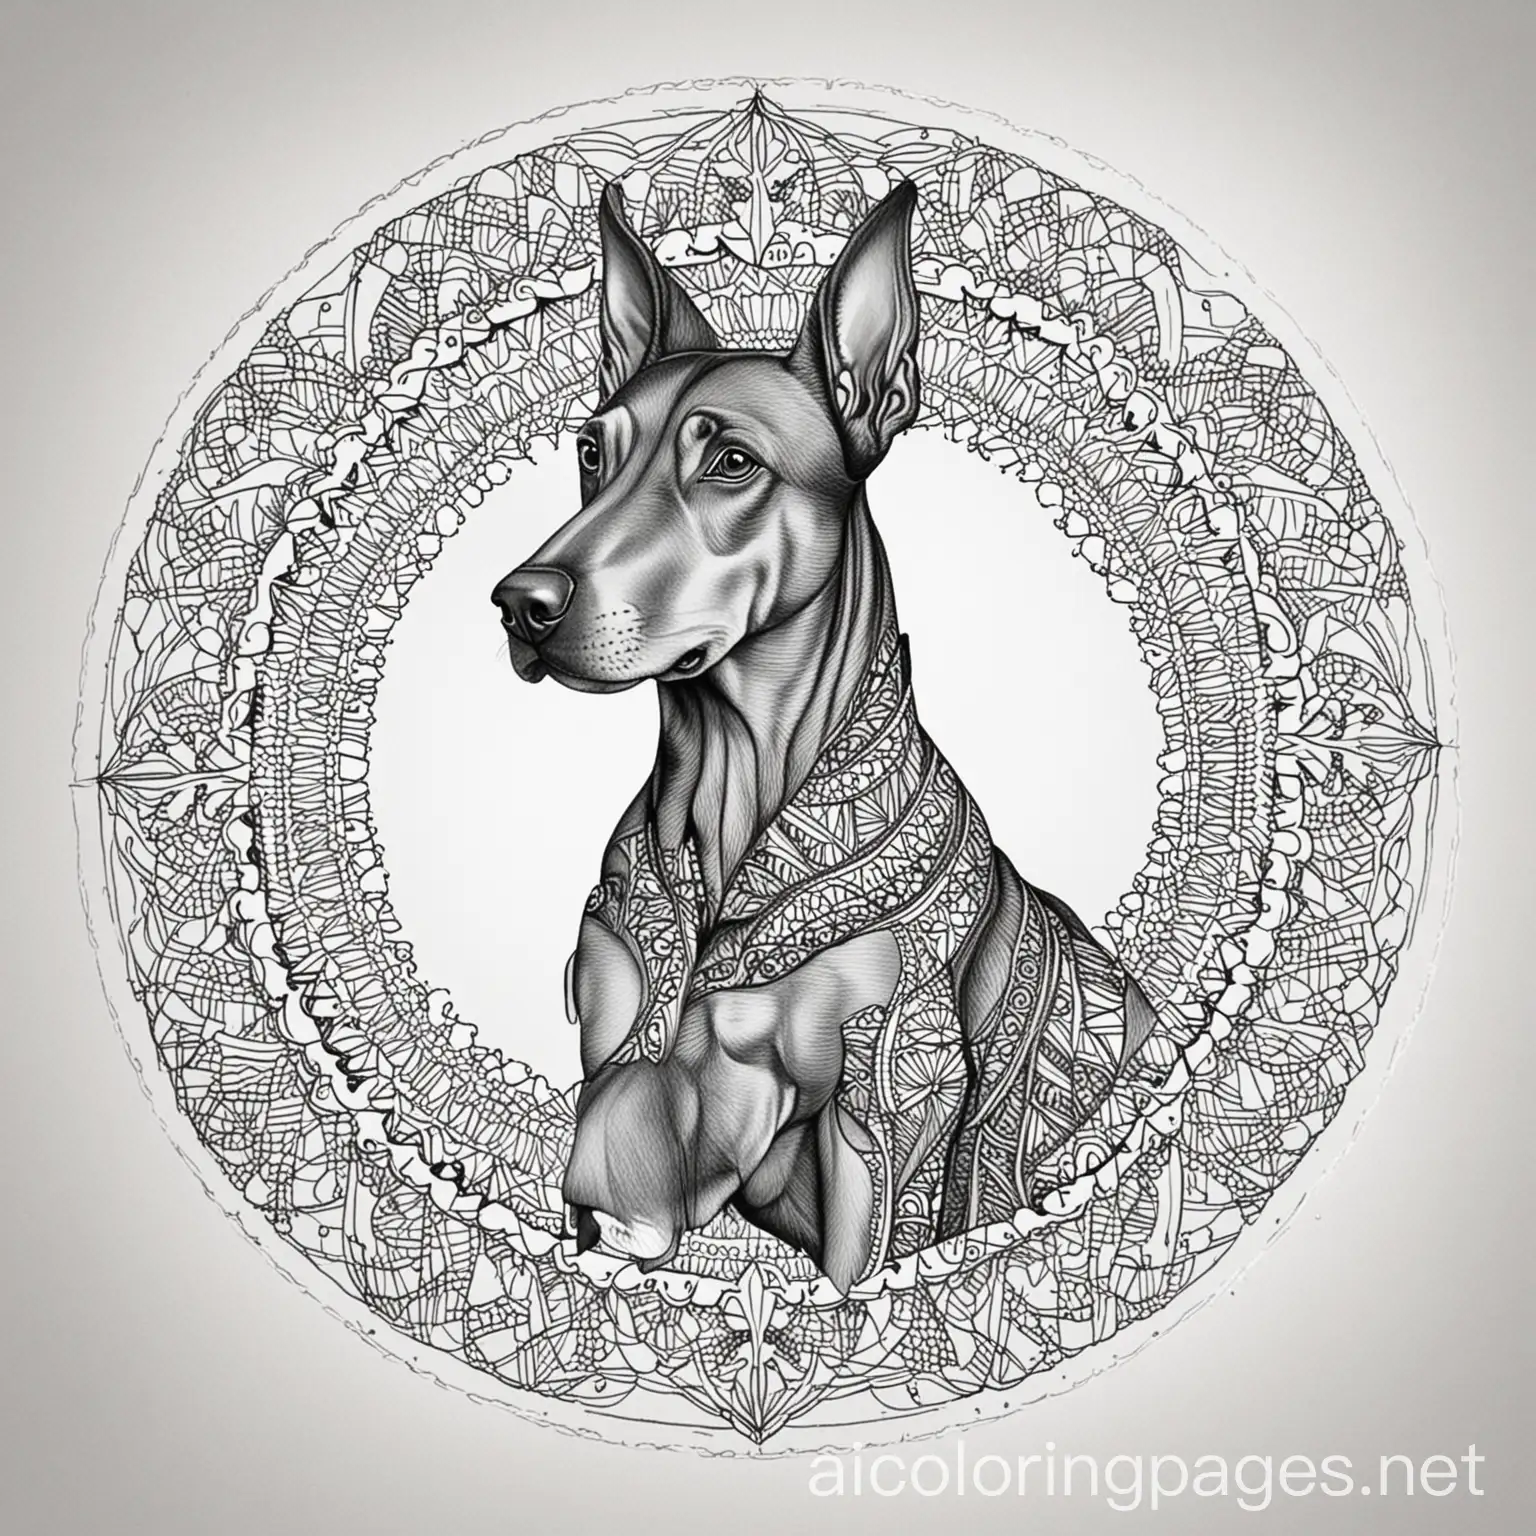 Dobermann mandala coloring page

, Coloring Page, black and white, line art, white background, Simplicity, Ample White Space. The background of the coloring page is plain white to make it easy for young children to color within the lines. The outlines of all the subjects are easy to distinguish, making it simple for kids to color without too much difficulty